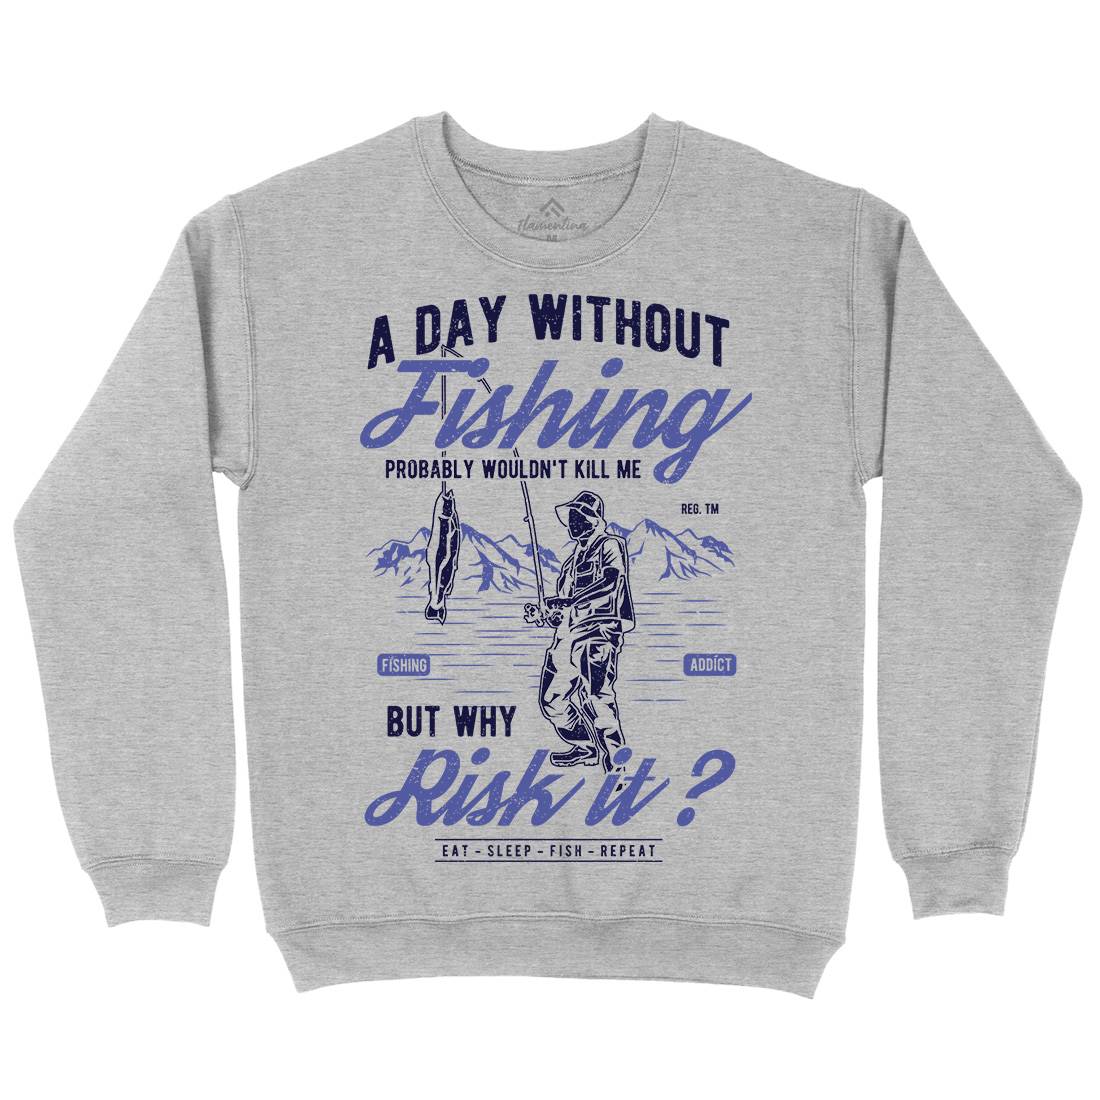 A Day Without Kids Crew Neck Sweatshirt Fishing A602